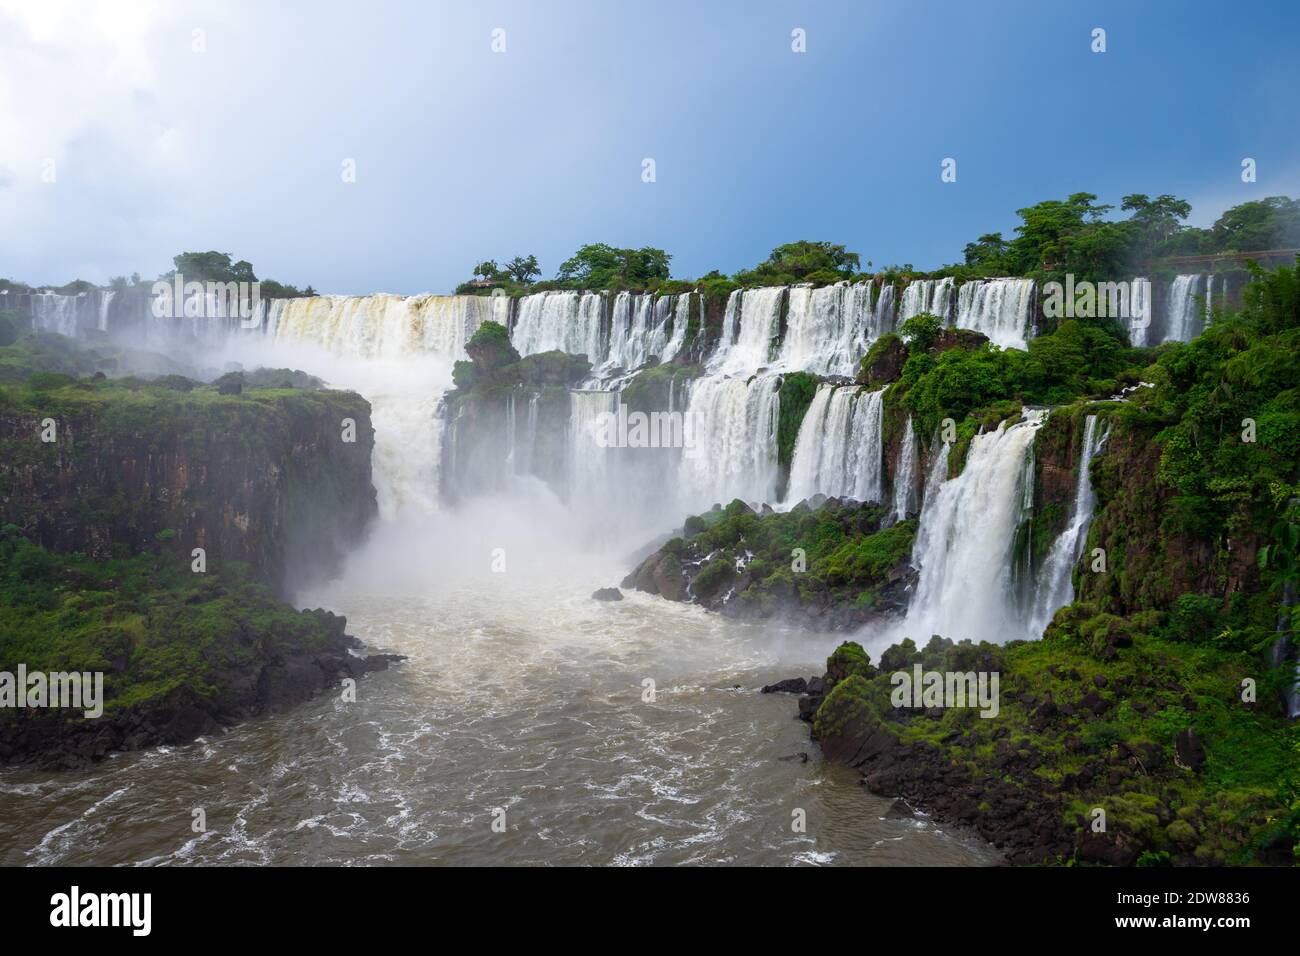 One of the biggest waterfalls in the world, Foz do Iguaçu (Iguazu Falls), as seen from the Argentinian side Stock Photo